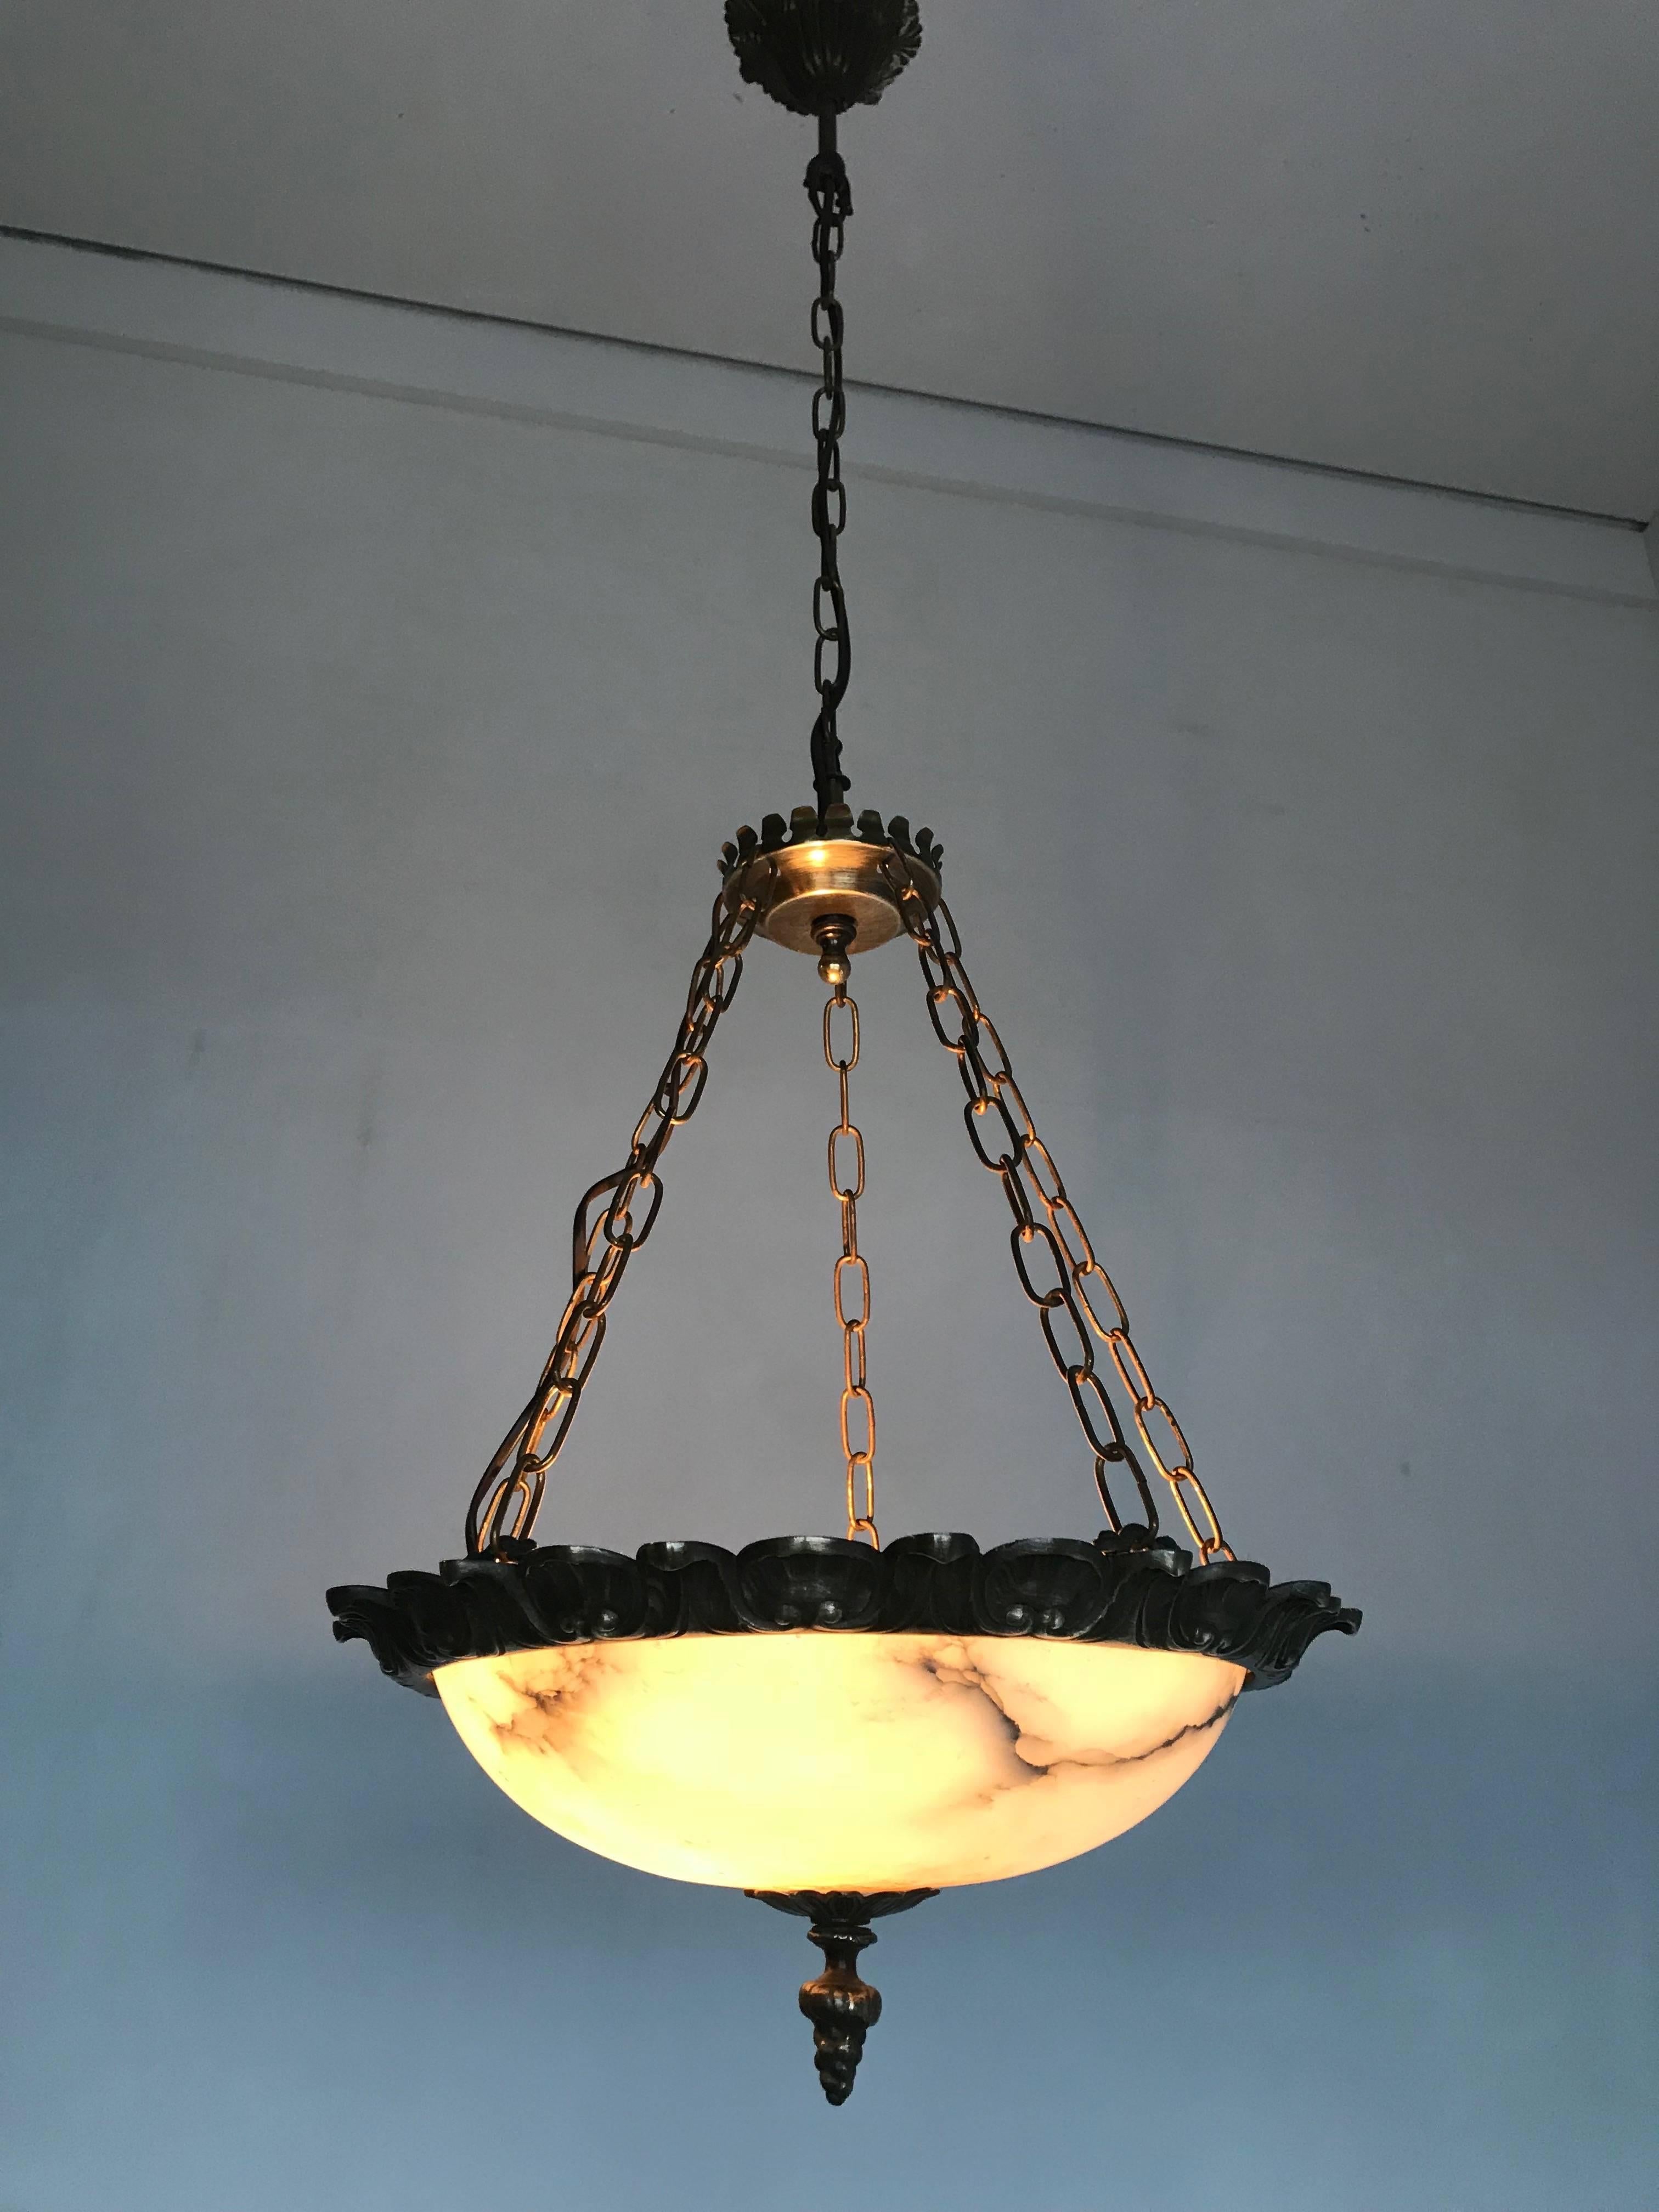 The ideal small pendant for a hallway, bedroom, kitchen, restroom etc. 

If you are looking for a stylish and good quality light fixture to grace your home then this fine specimen could be perfect for you. The warm light that this beautiful,